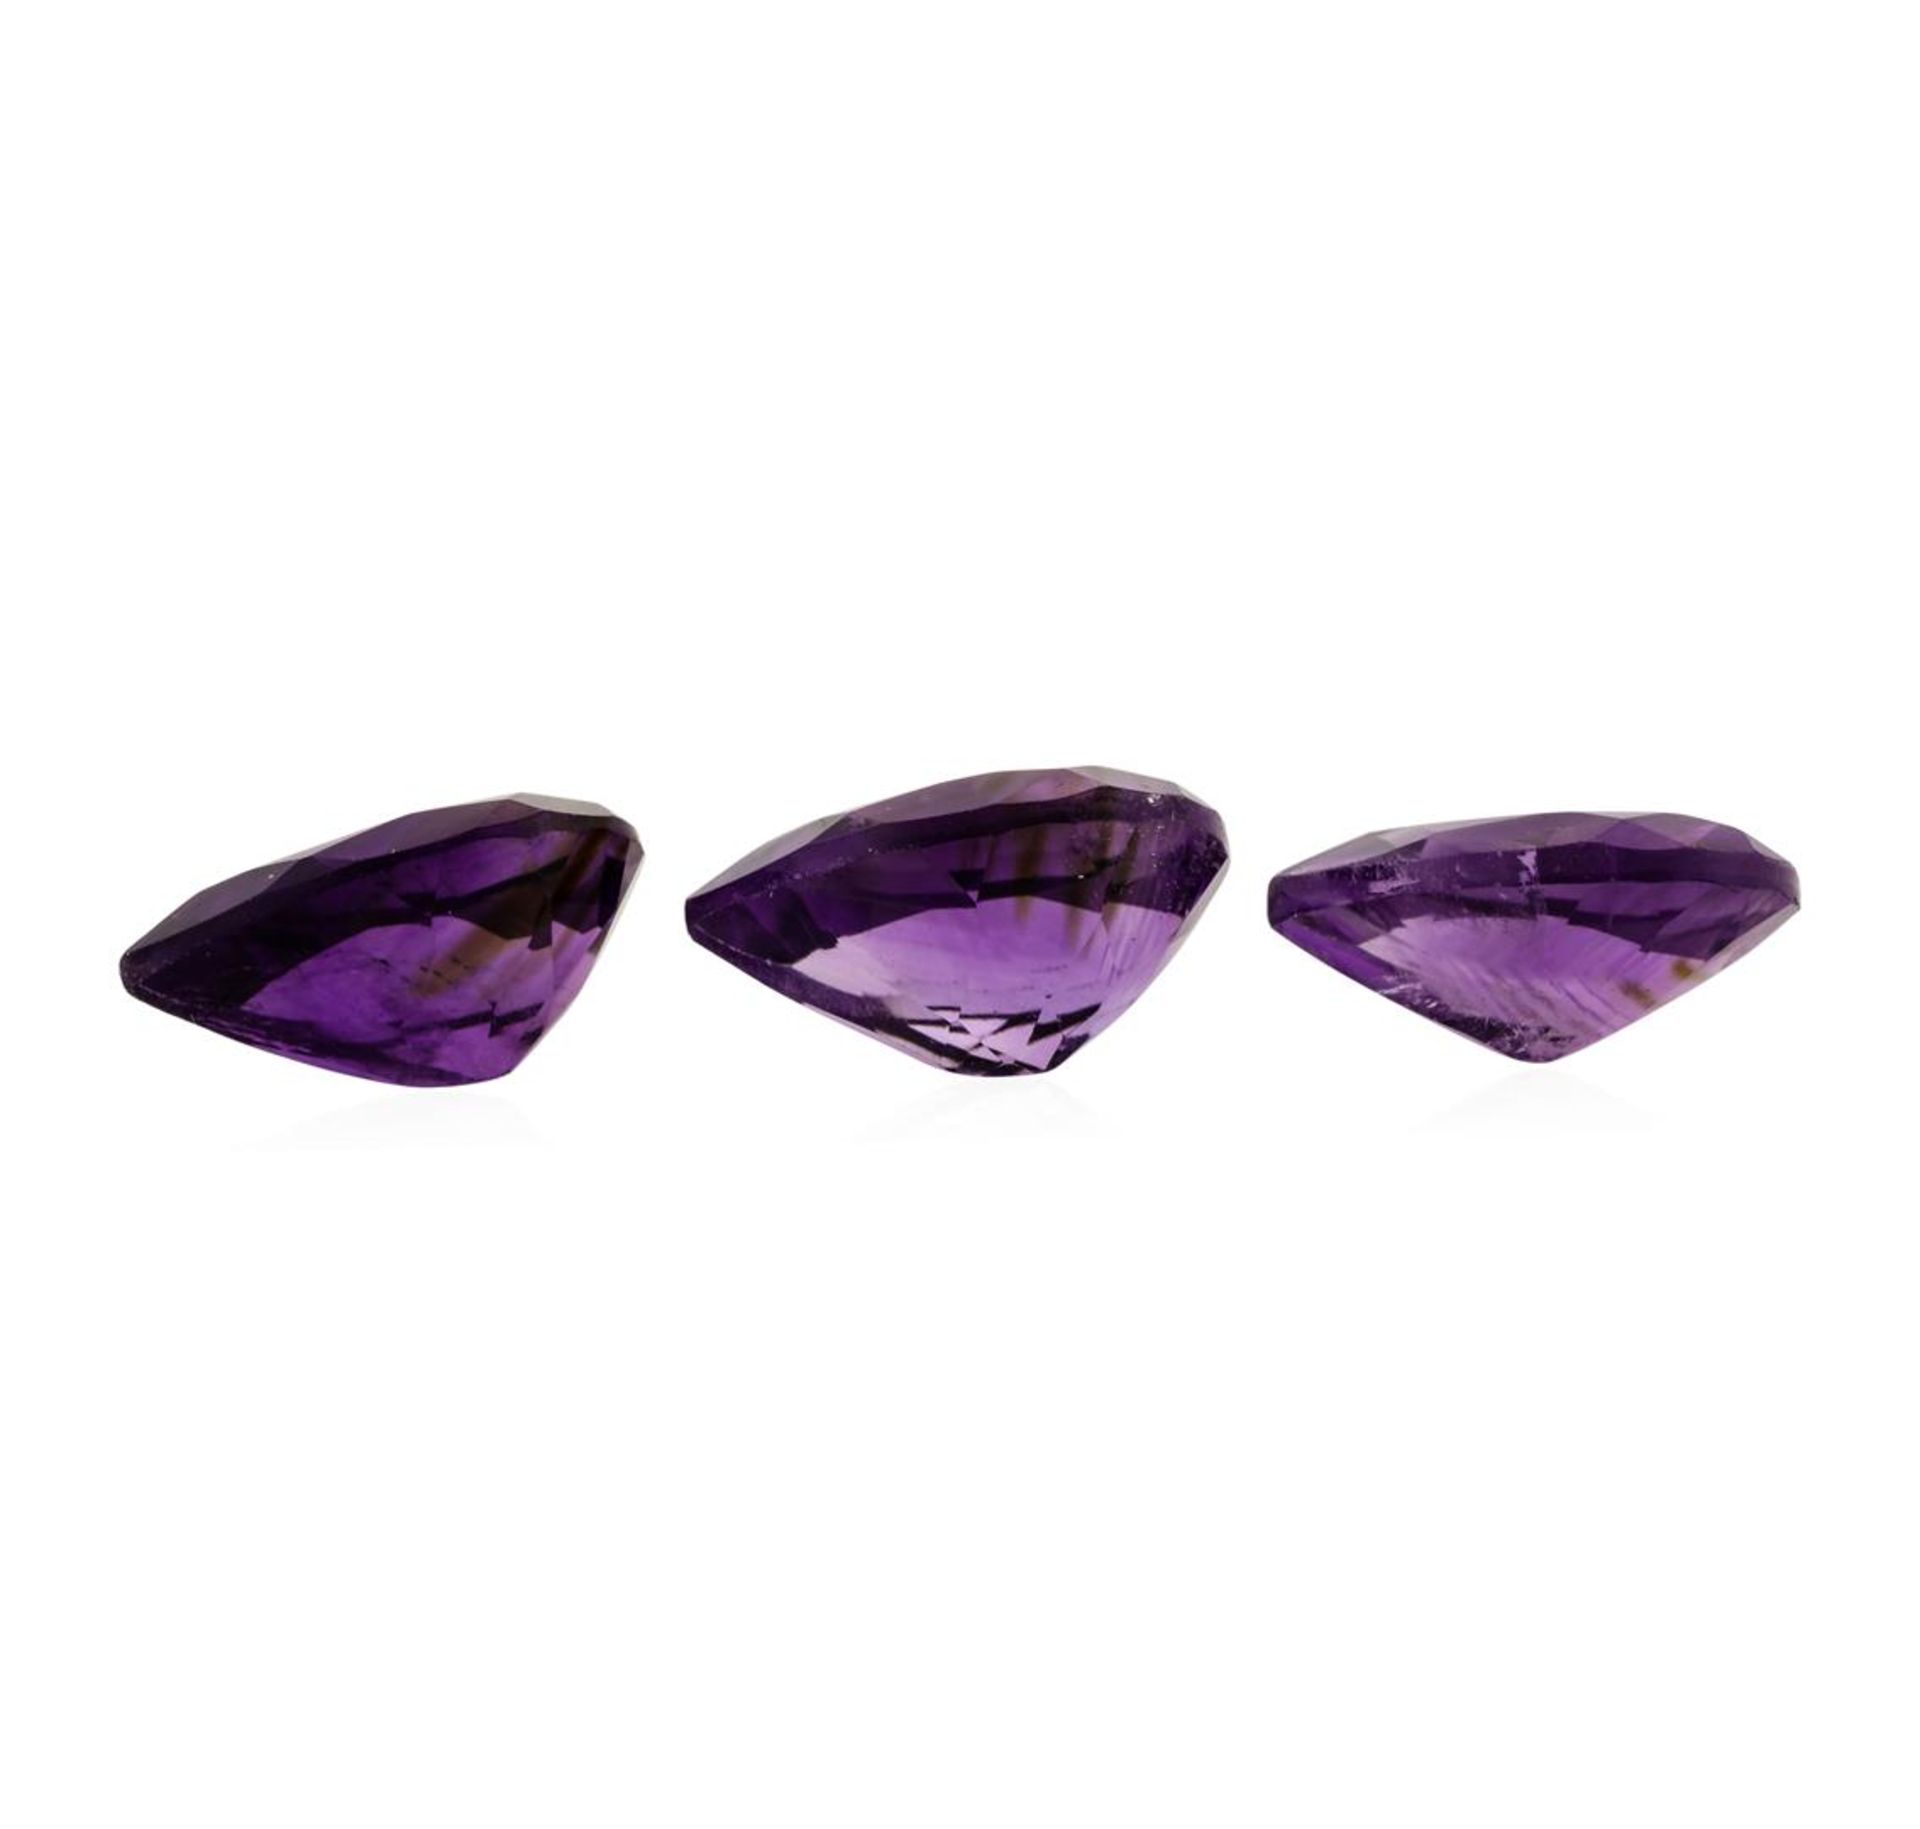 22.91 ctw.Natural Pear Cut Amethyst Parcel of Three - Image 2 of 3